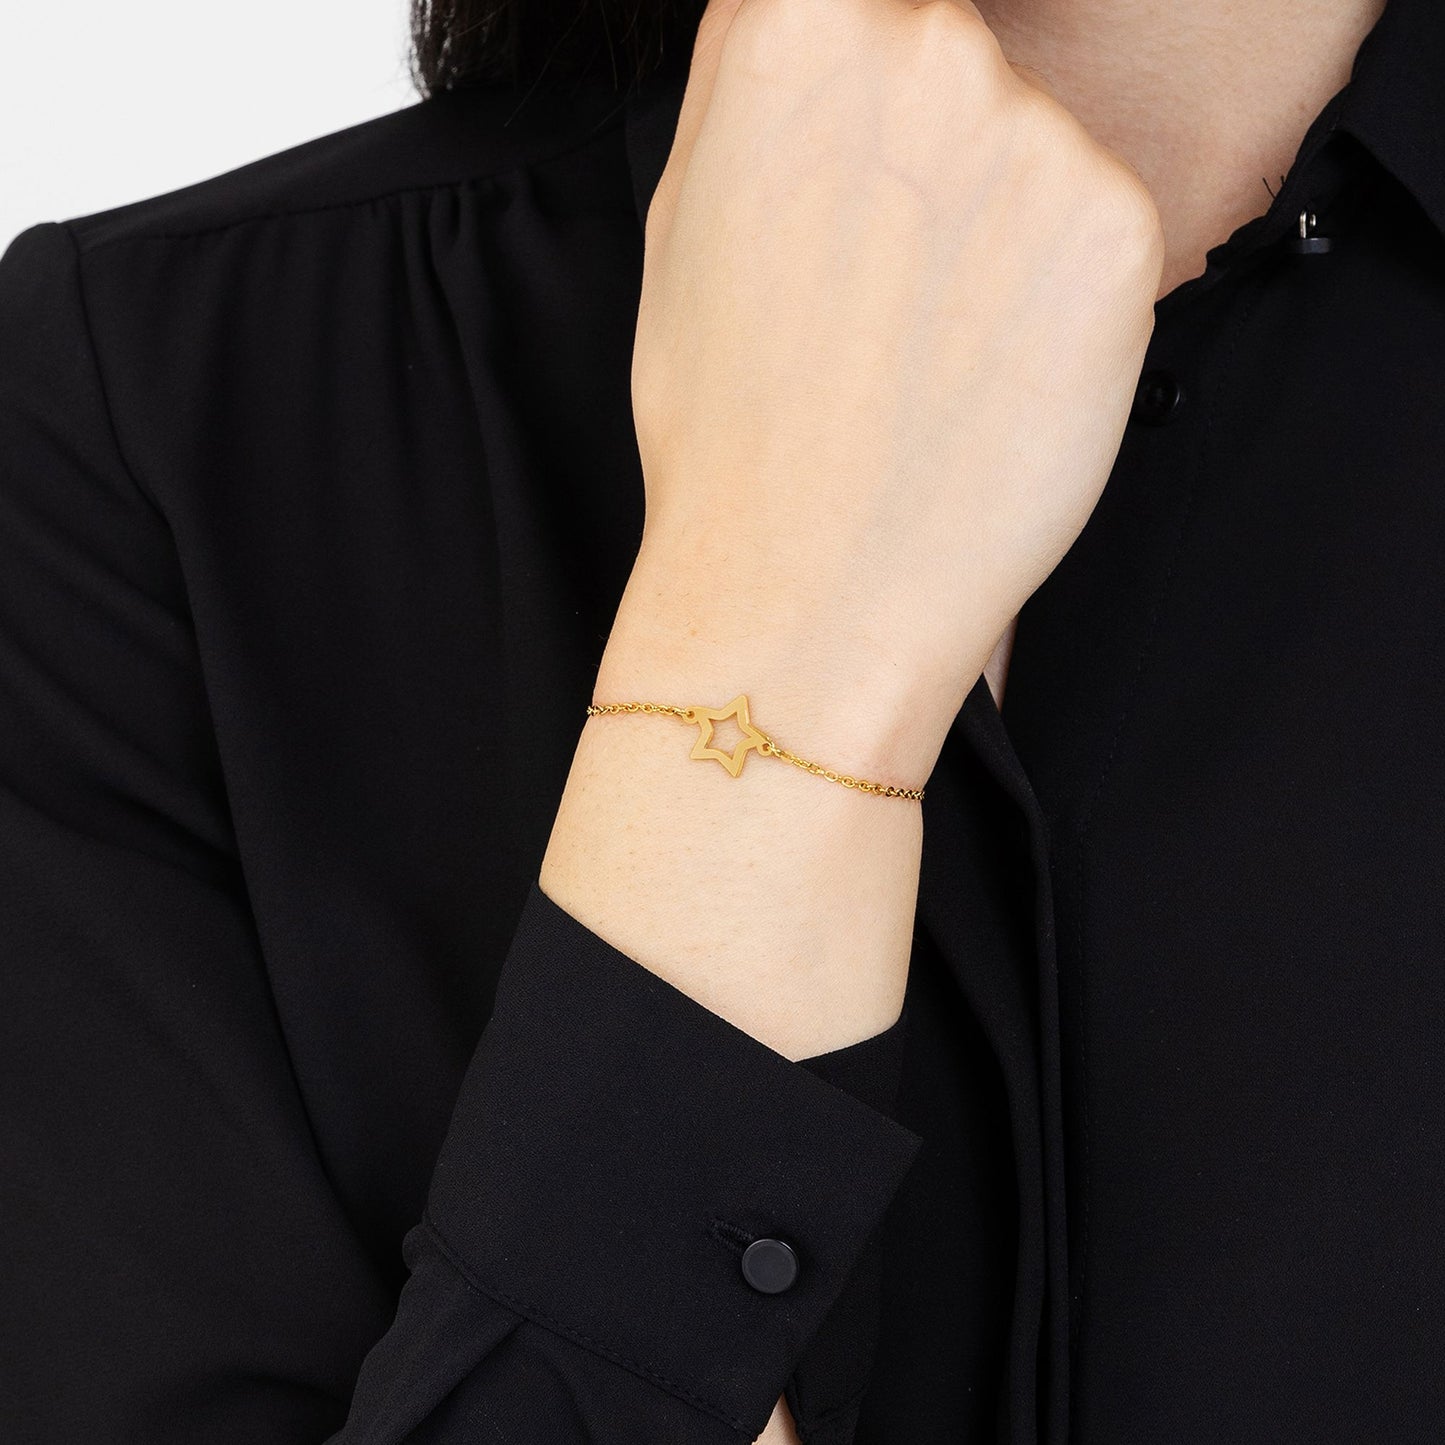 WOMEN'S GOLD-PLATED STEEL BRACELET WITH HOLLOW STAR